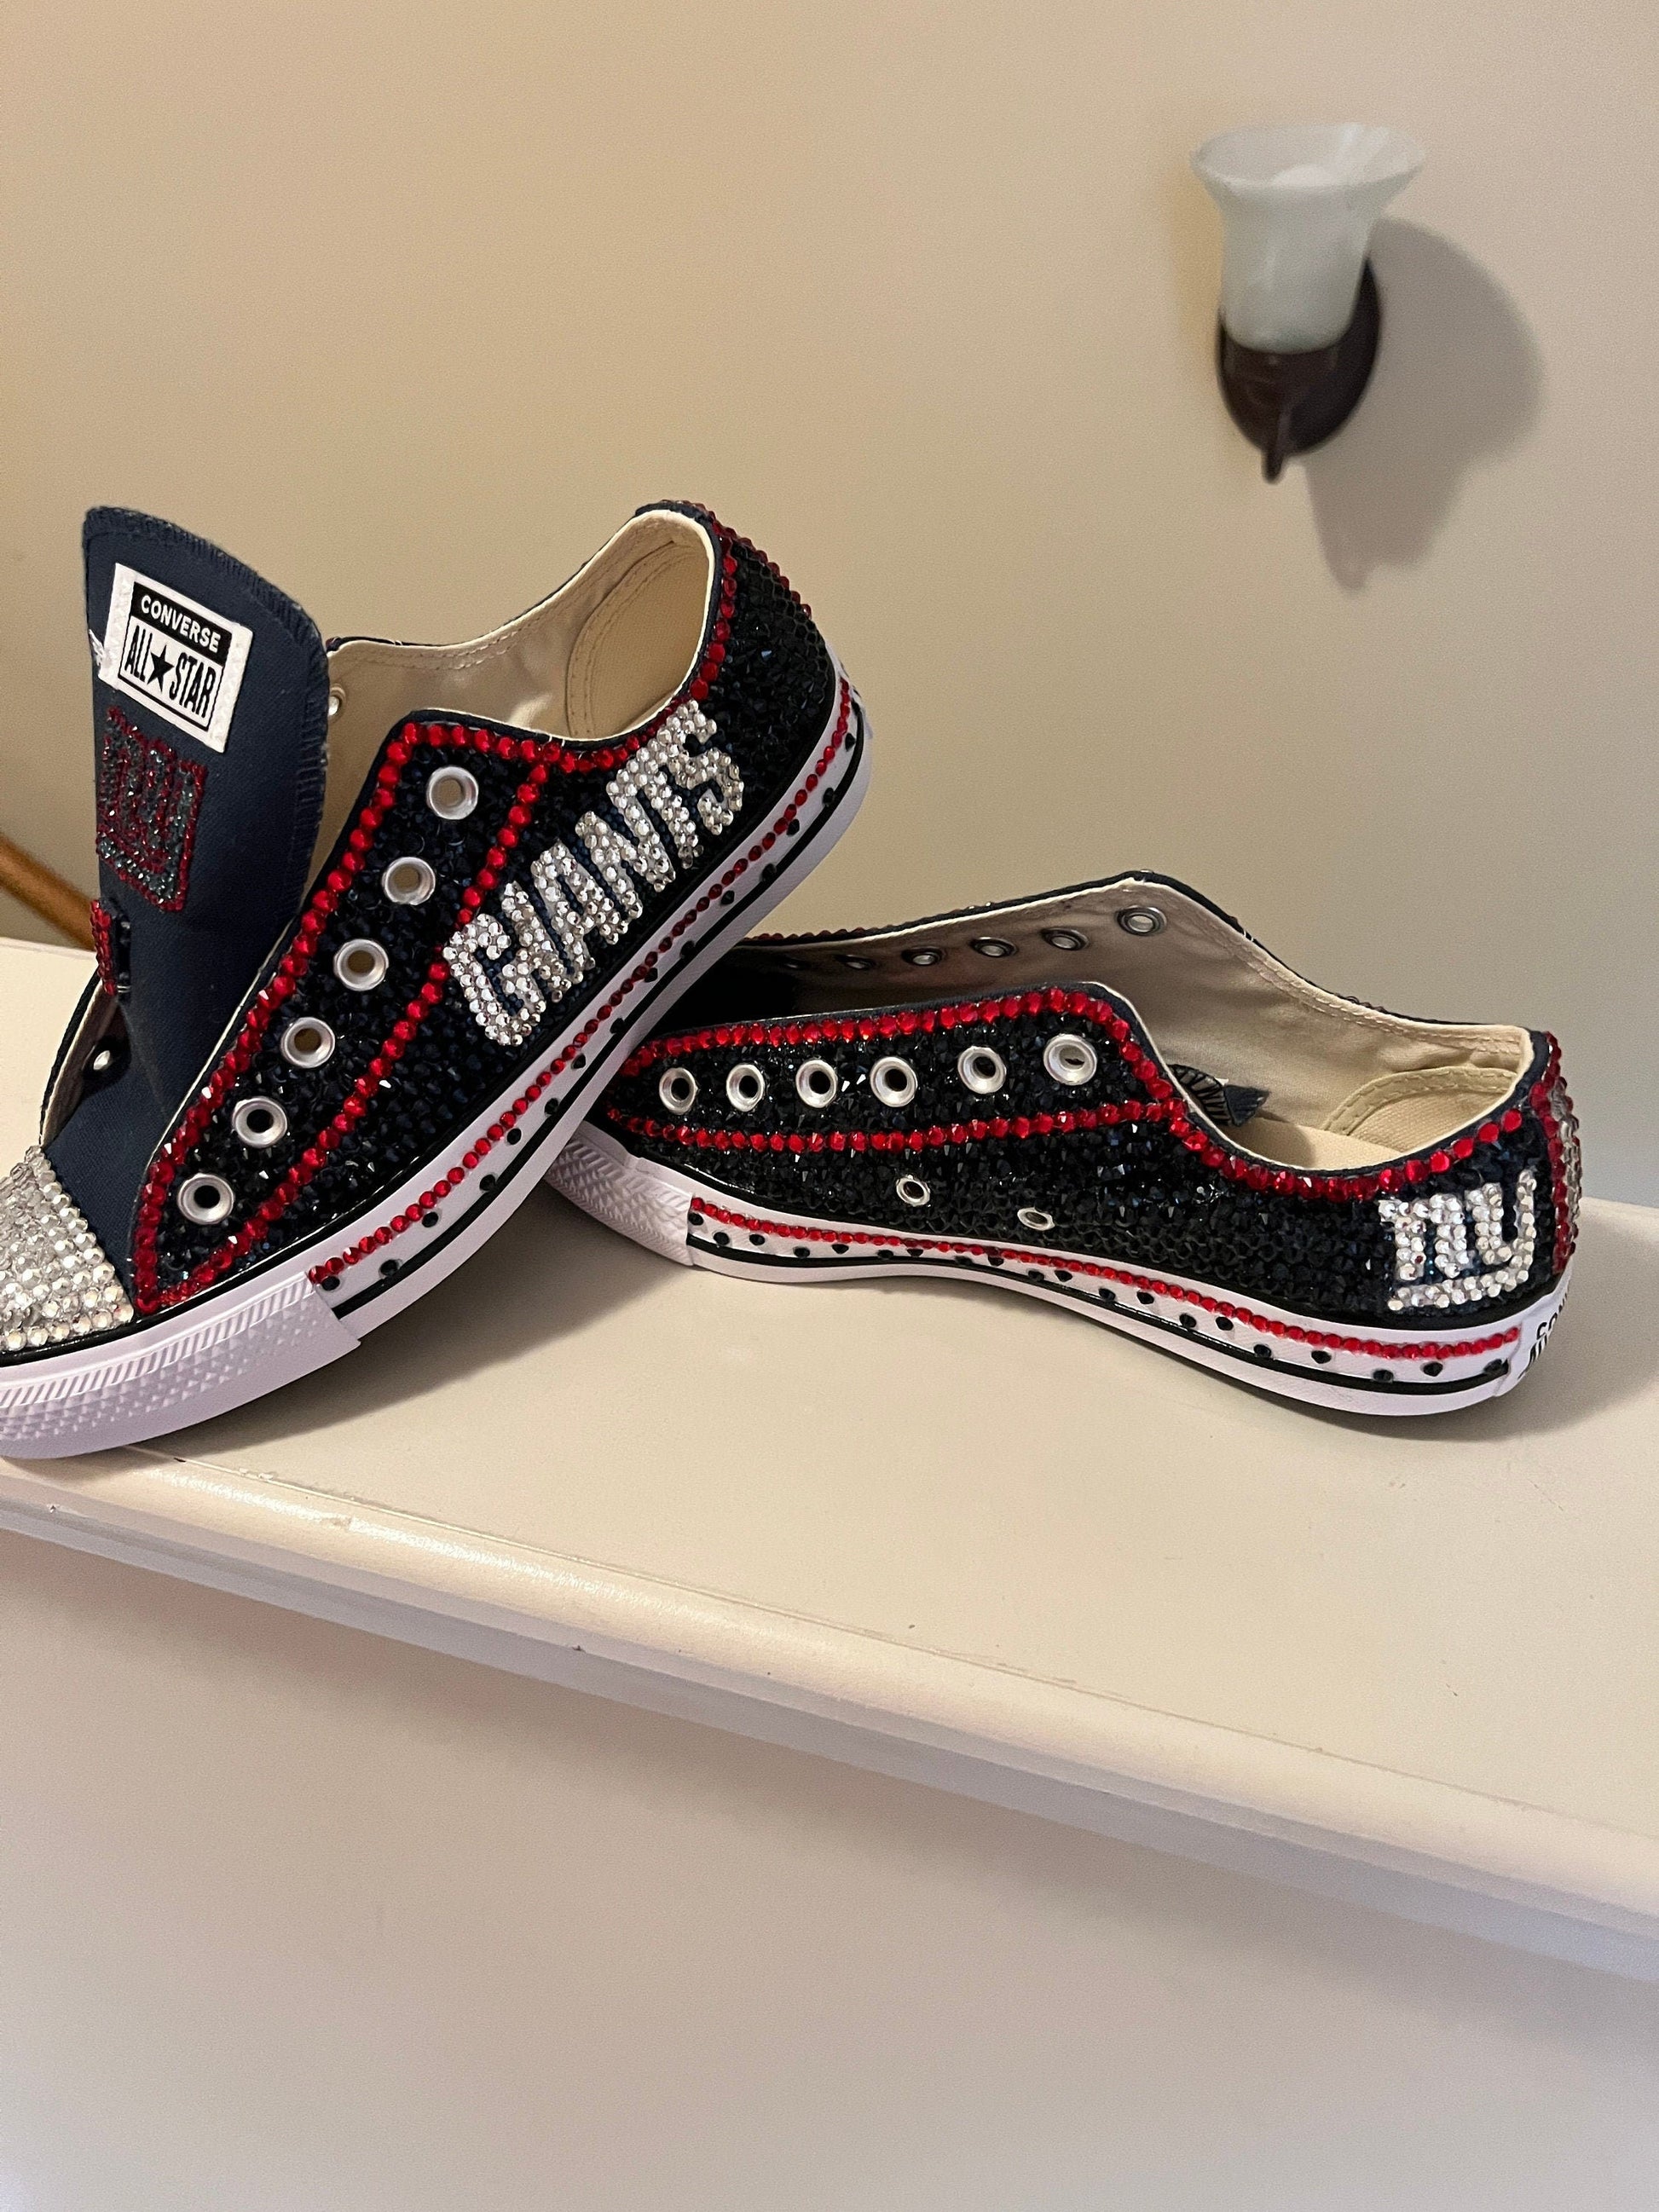 NFL/NCAA Rhinestoned Low Top Converse Tennis shoes.